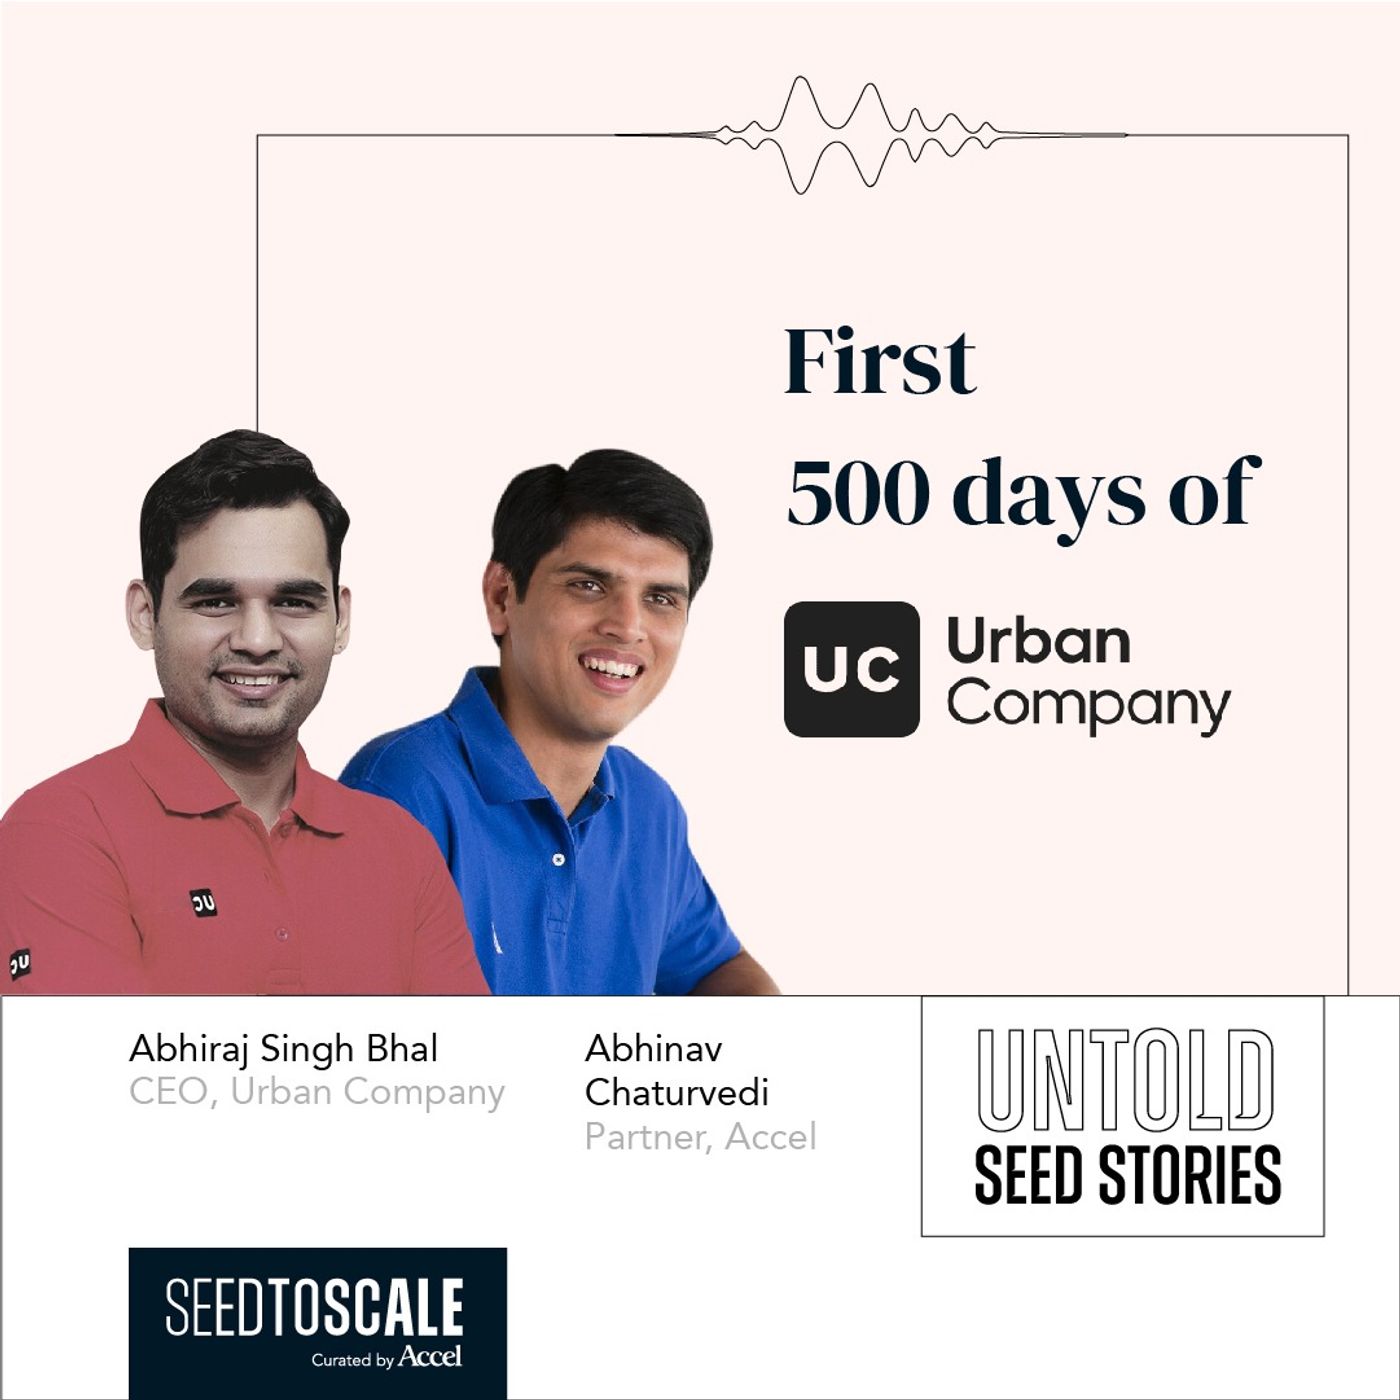 INSIGHTS #59 – Untold Seed Stories: First 500 Days of Urban Company